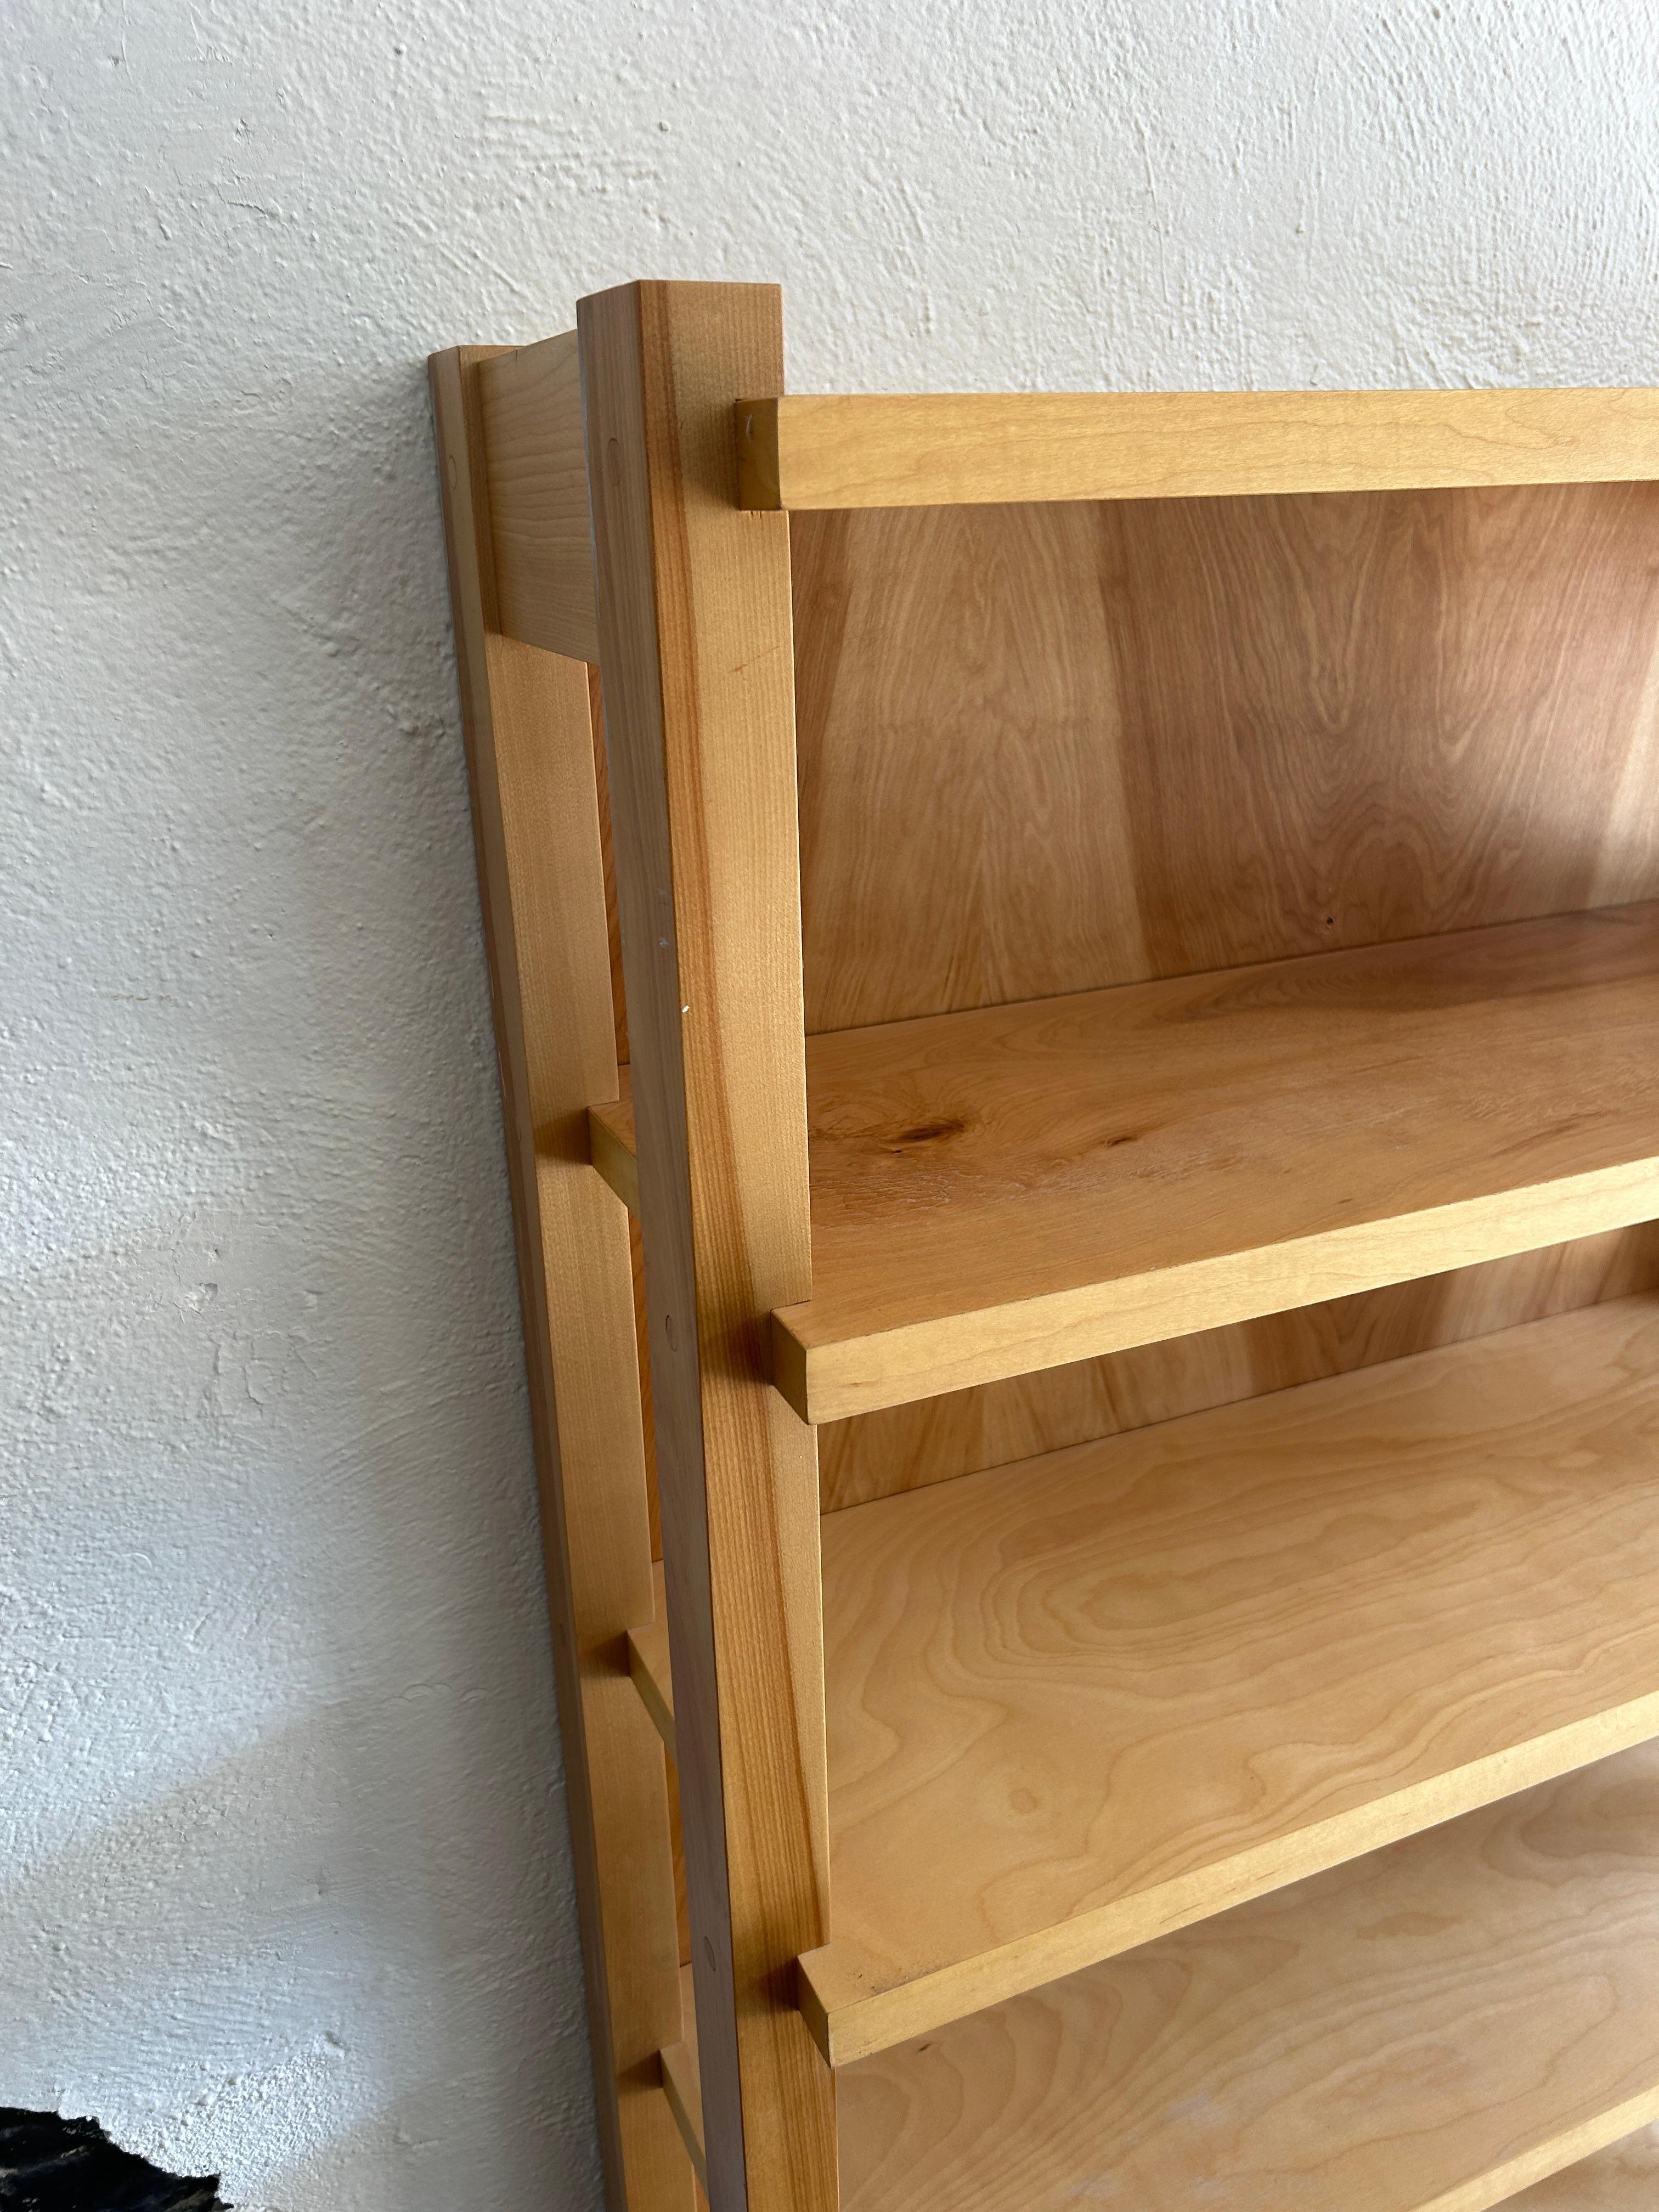 Mid century custom made blonde birch wood shelf wall unit or open bookcase. Very modern design and well built. Made of solid birch uprights and birch veneer plywood shelves. Very solid bookcase all 1 unit - no shelves adjust. Custom made in USA.